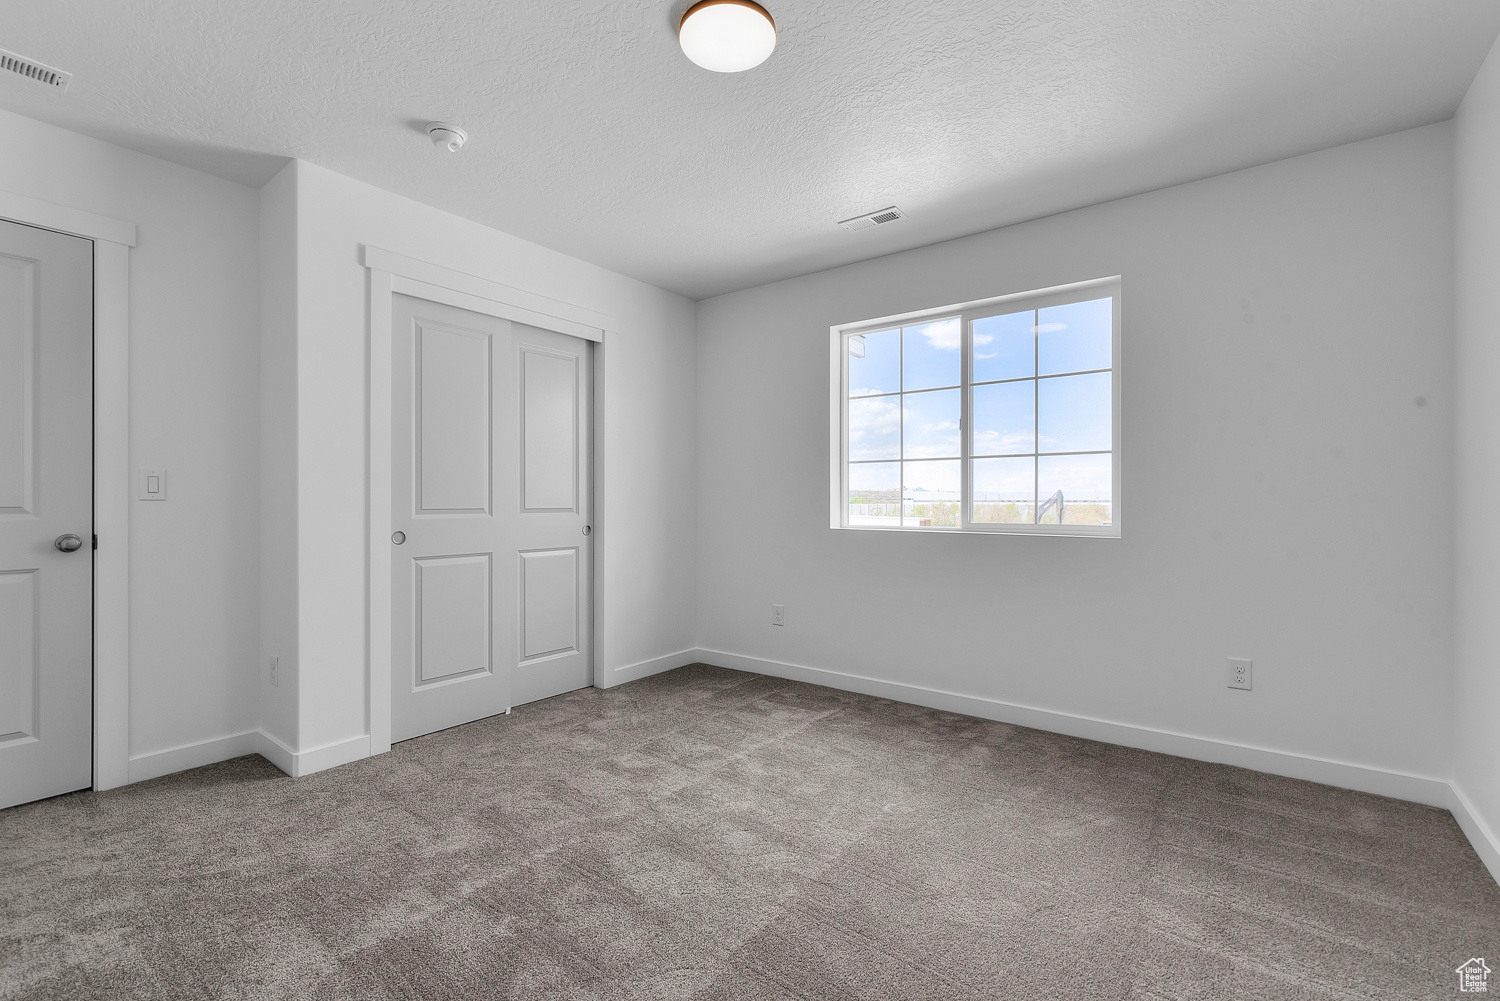 Unfurnished bedroom with a textured ceiling and carpet flooring